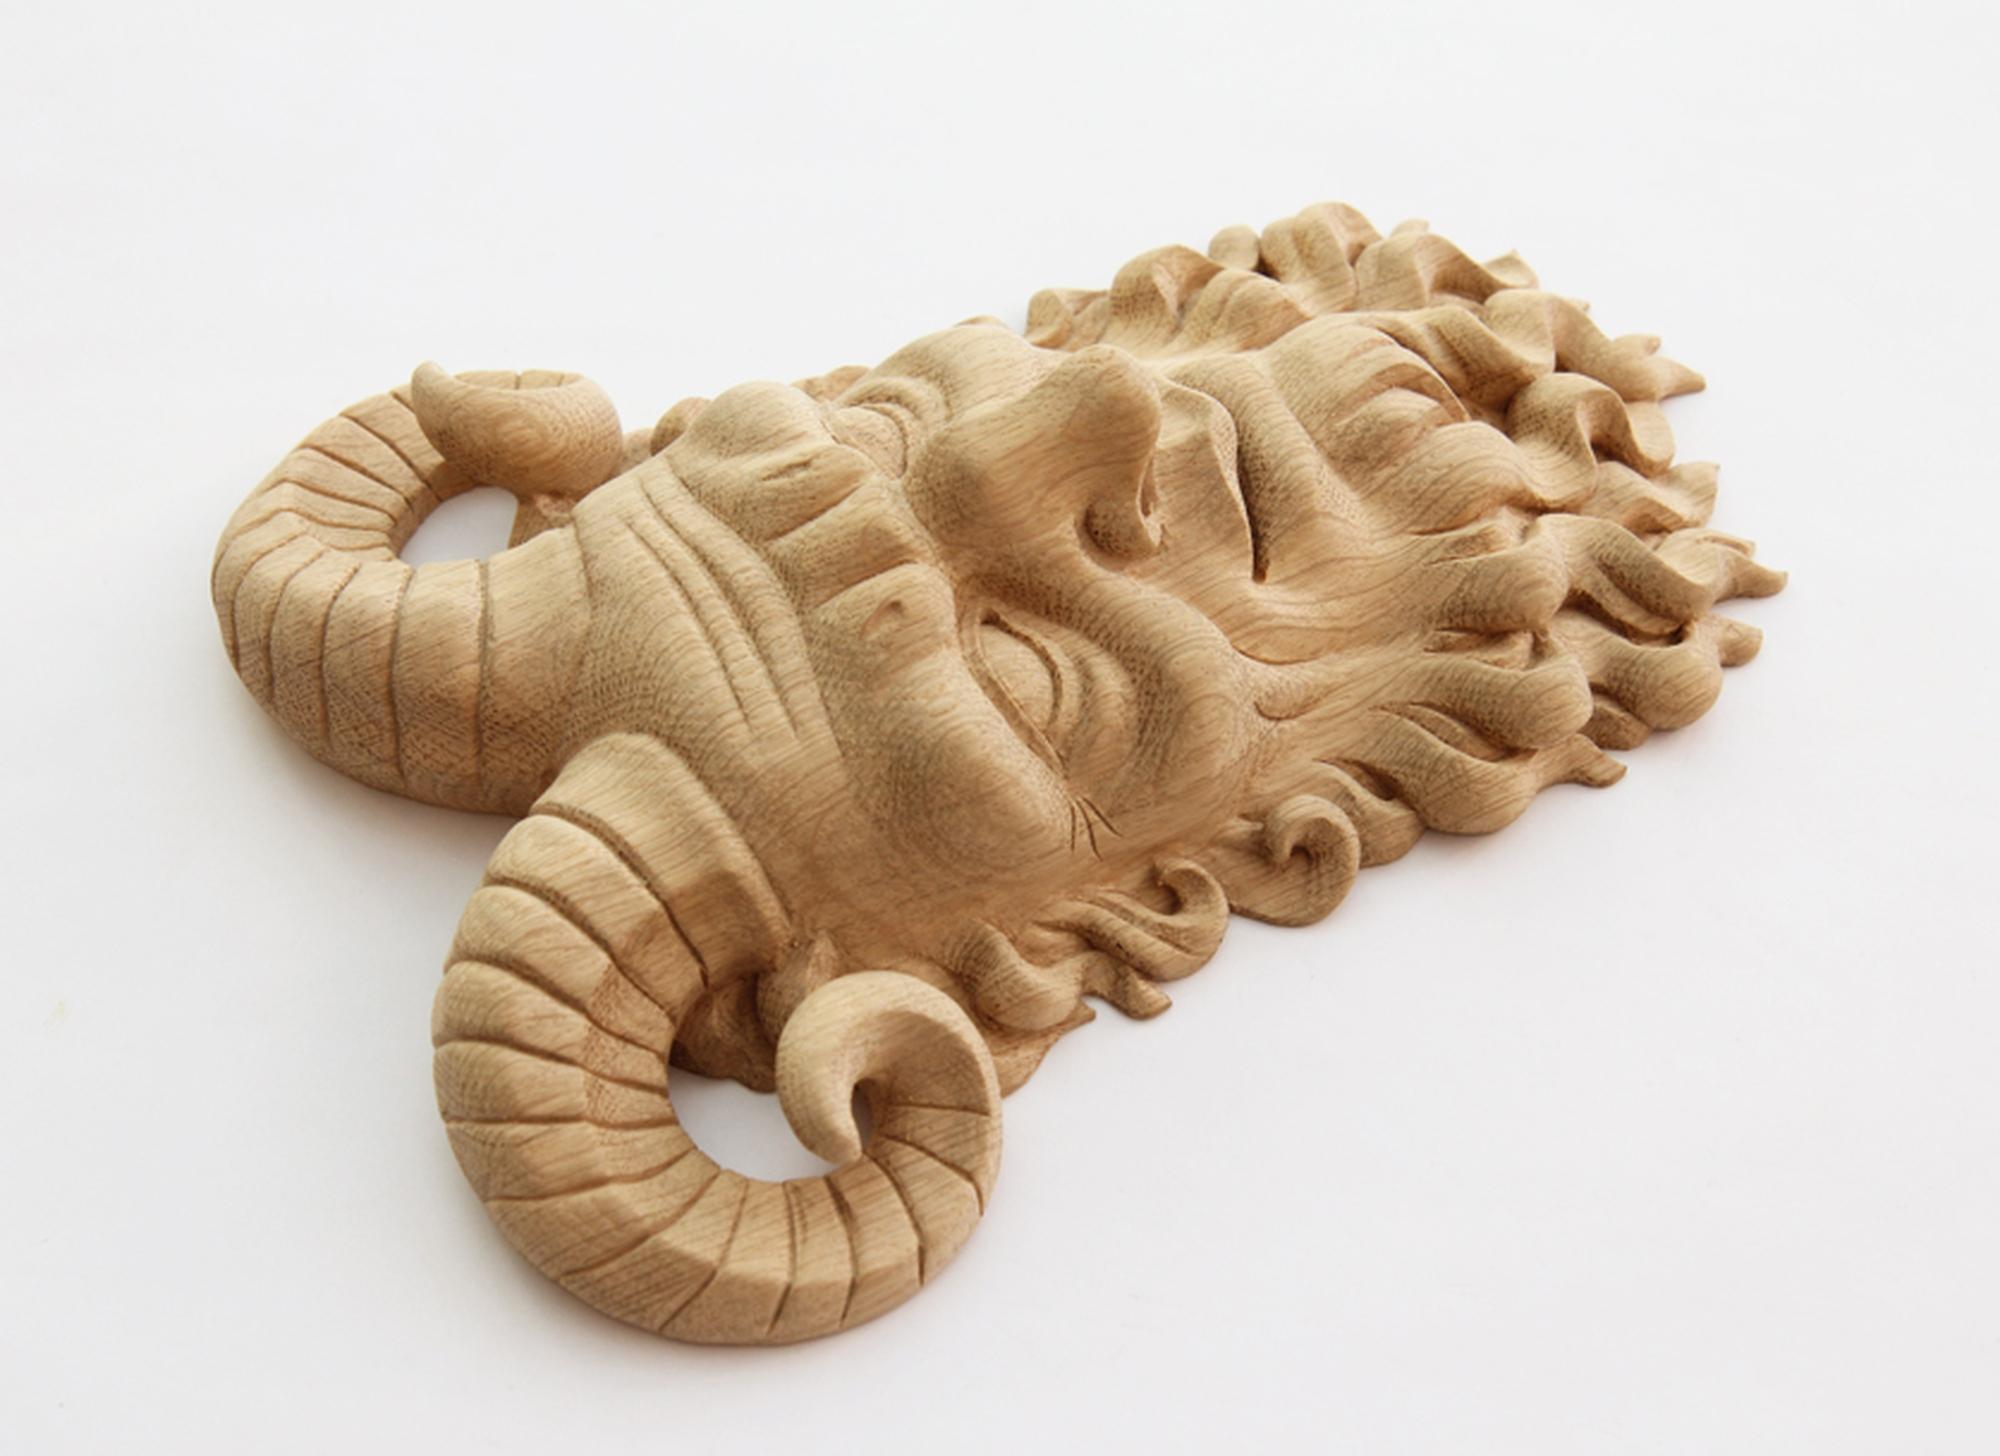 Classical Greek Satyr Antique Mask 'Wood Rosette' Hand Carving Craft Wall Art from Oak or Beech For Sale